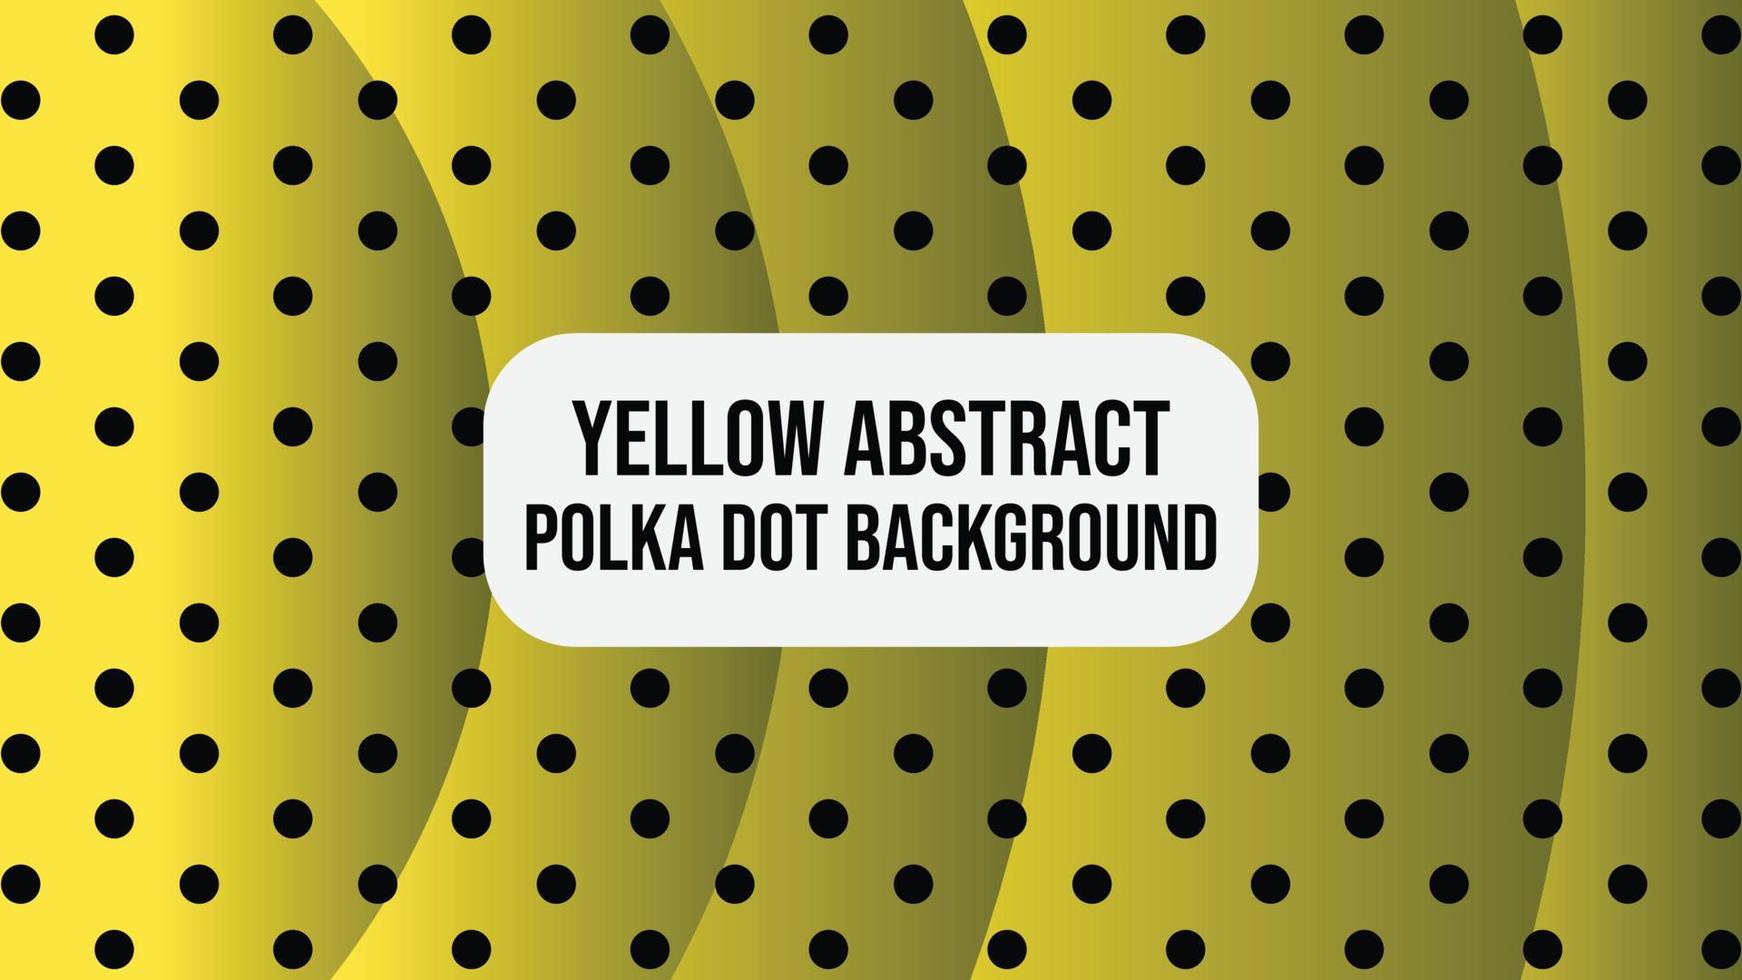 Yellow Abstract Polka Dot Gradient Background Wallpaper Vector Art and Graphics